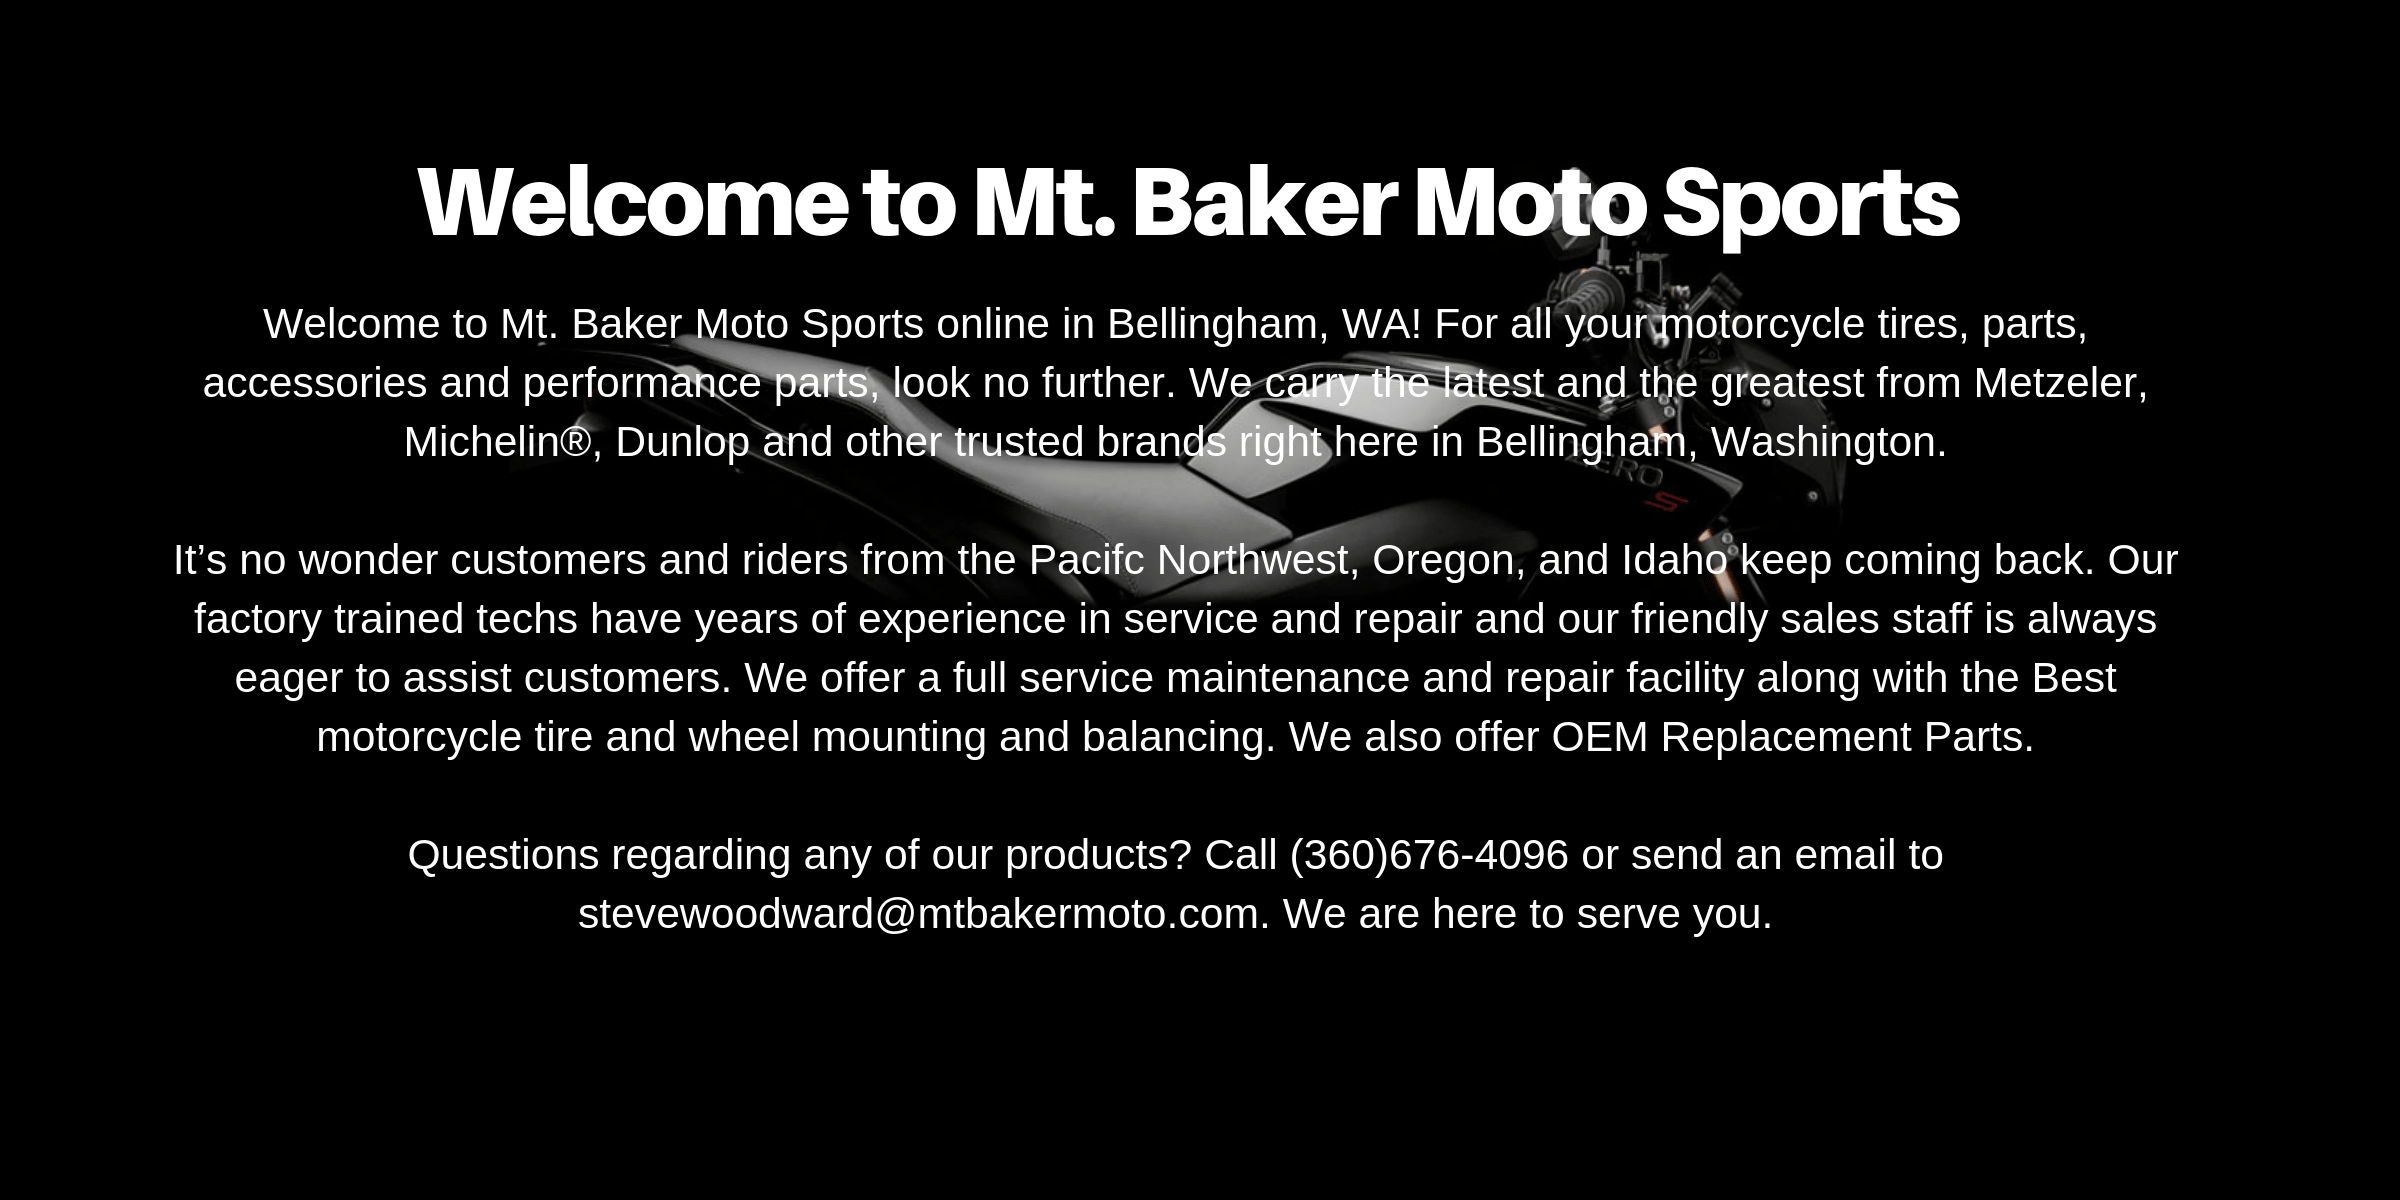 Welcome to Mt. Baker Motor-Sports